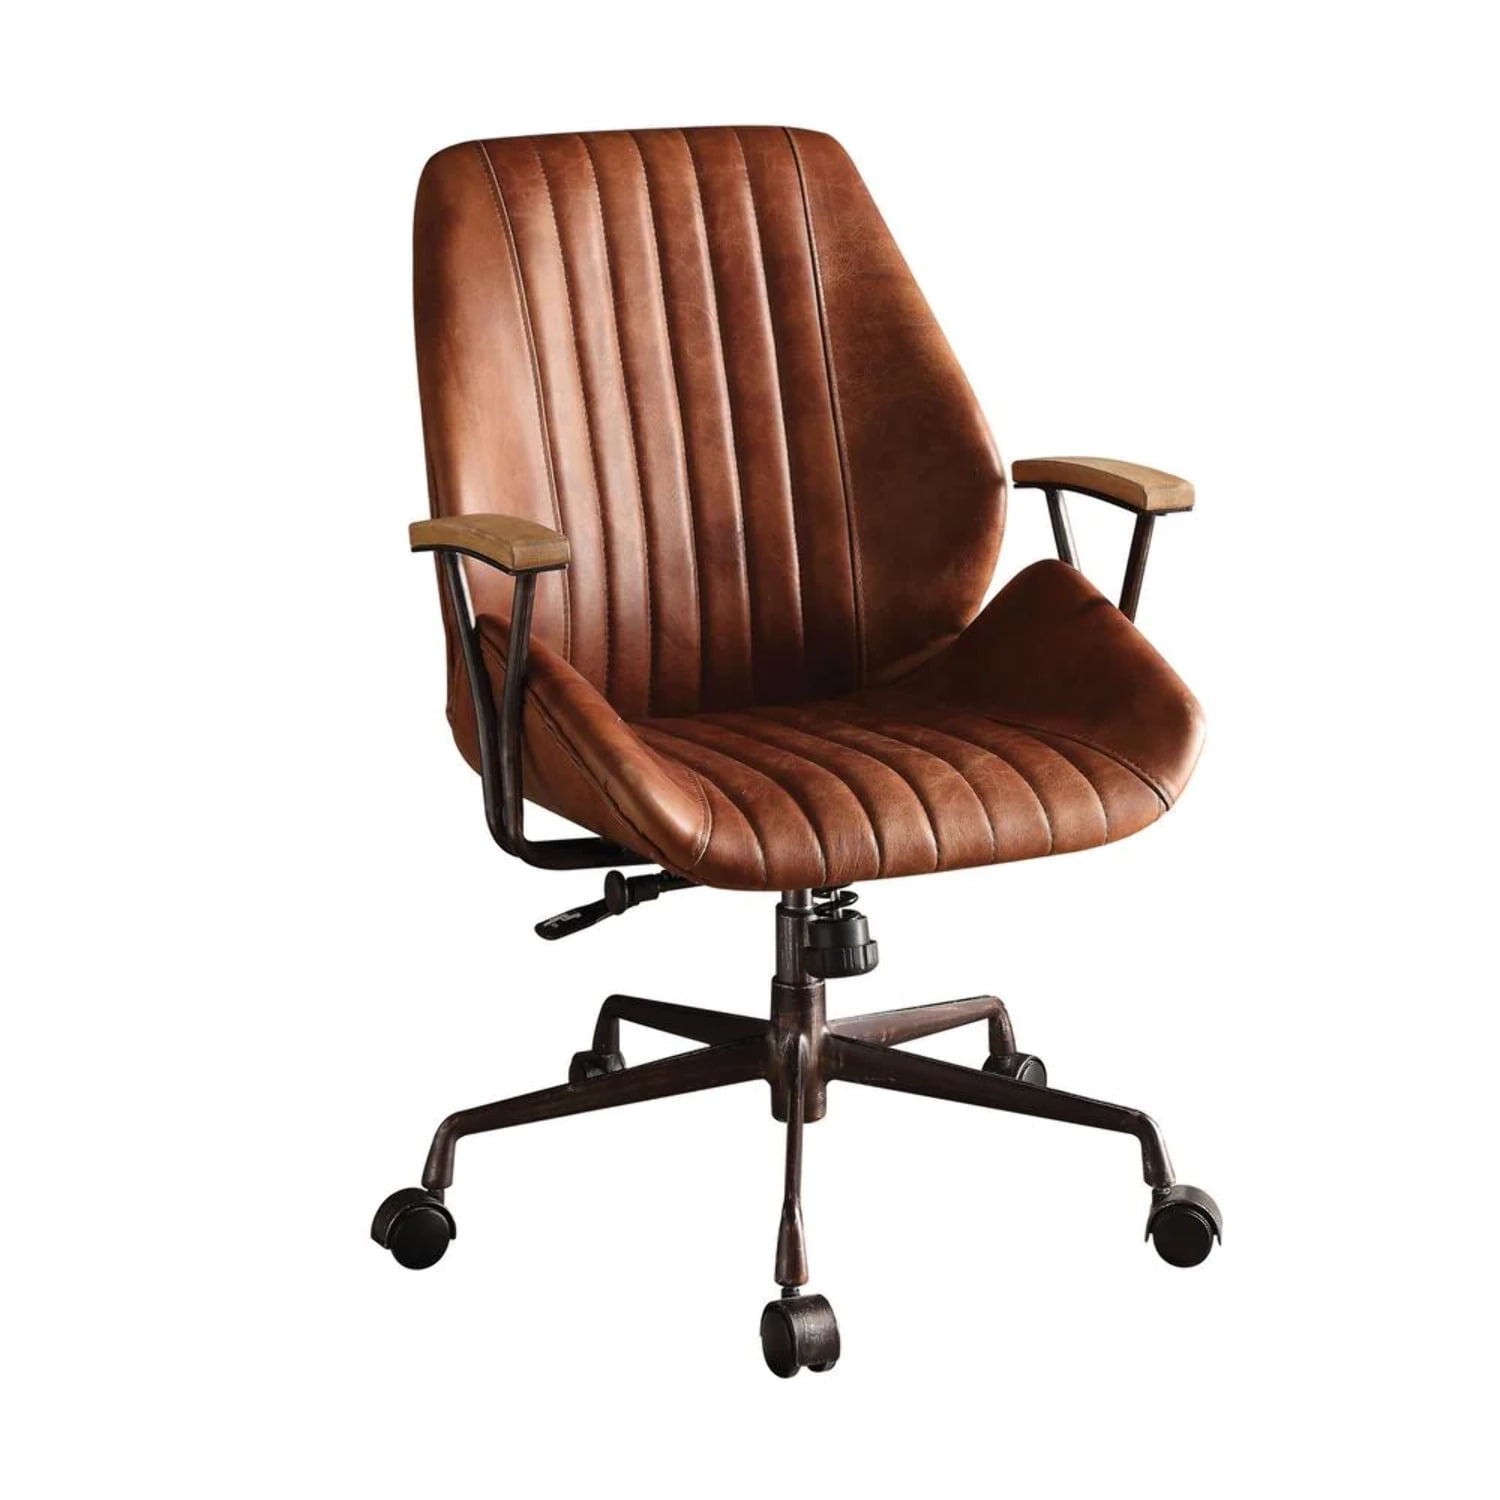 Picture of ACME 92413 Hamilton Executive Office Chair - Cocoa Top Grain Leather - 42 x 24 x 28 in.